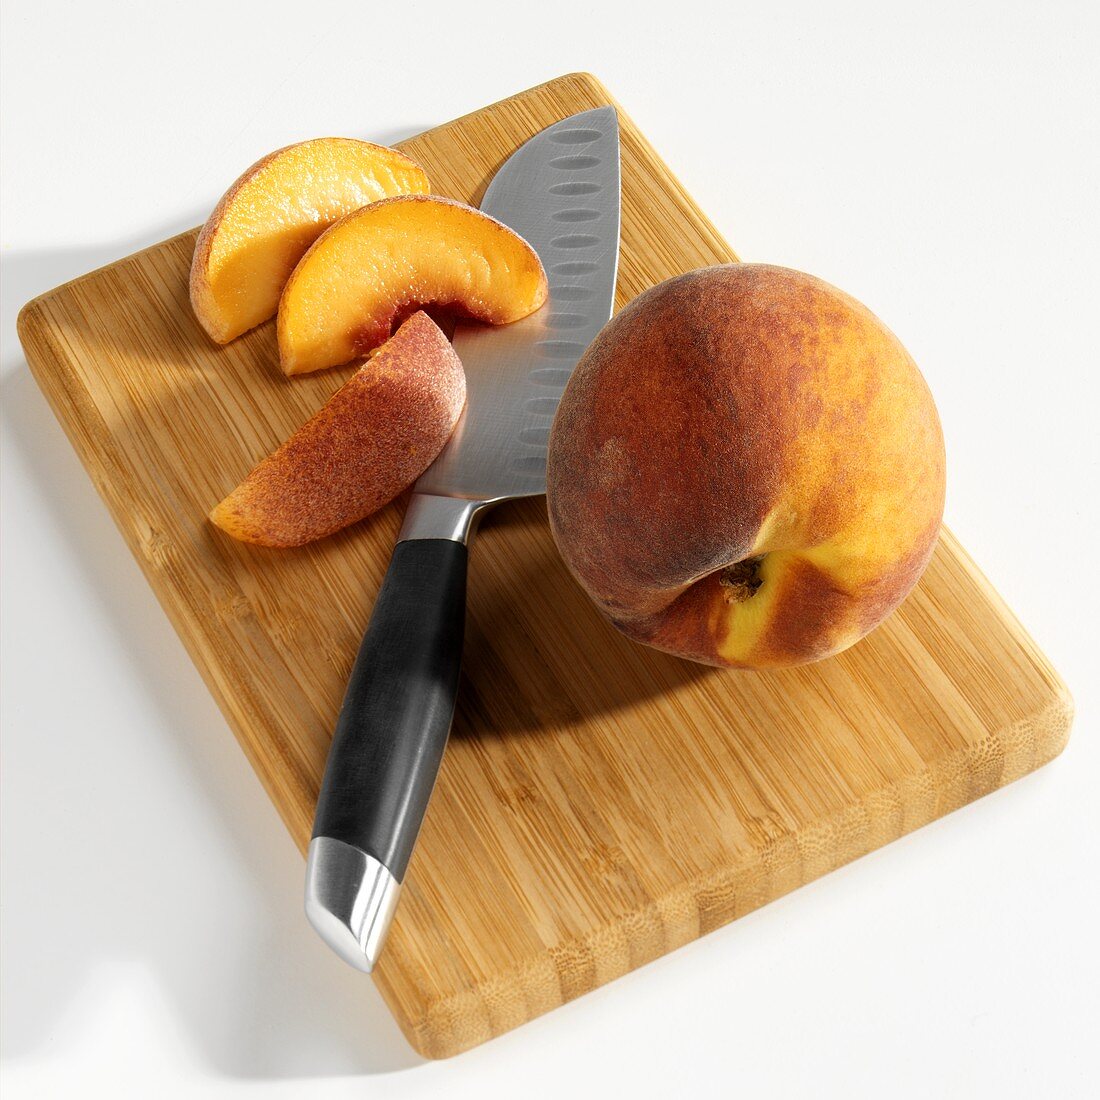 Whole peach and peach slices on wooden board with knife